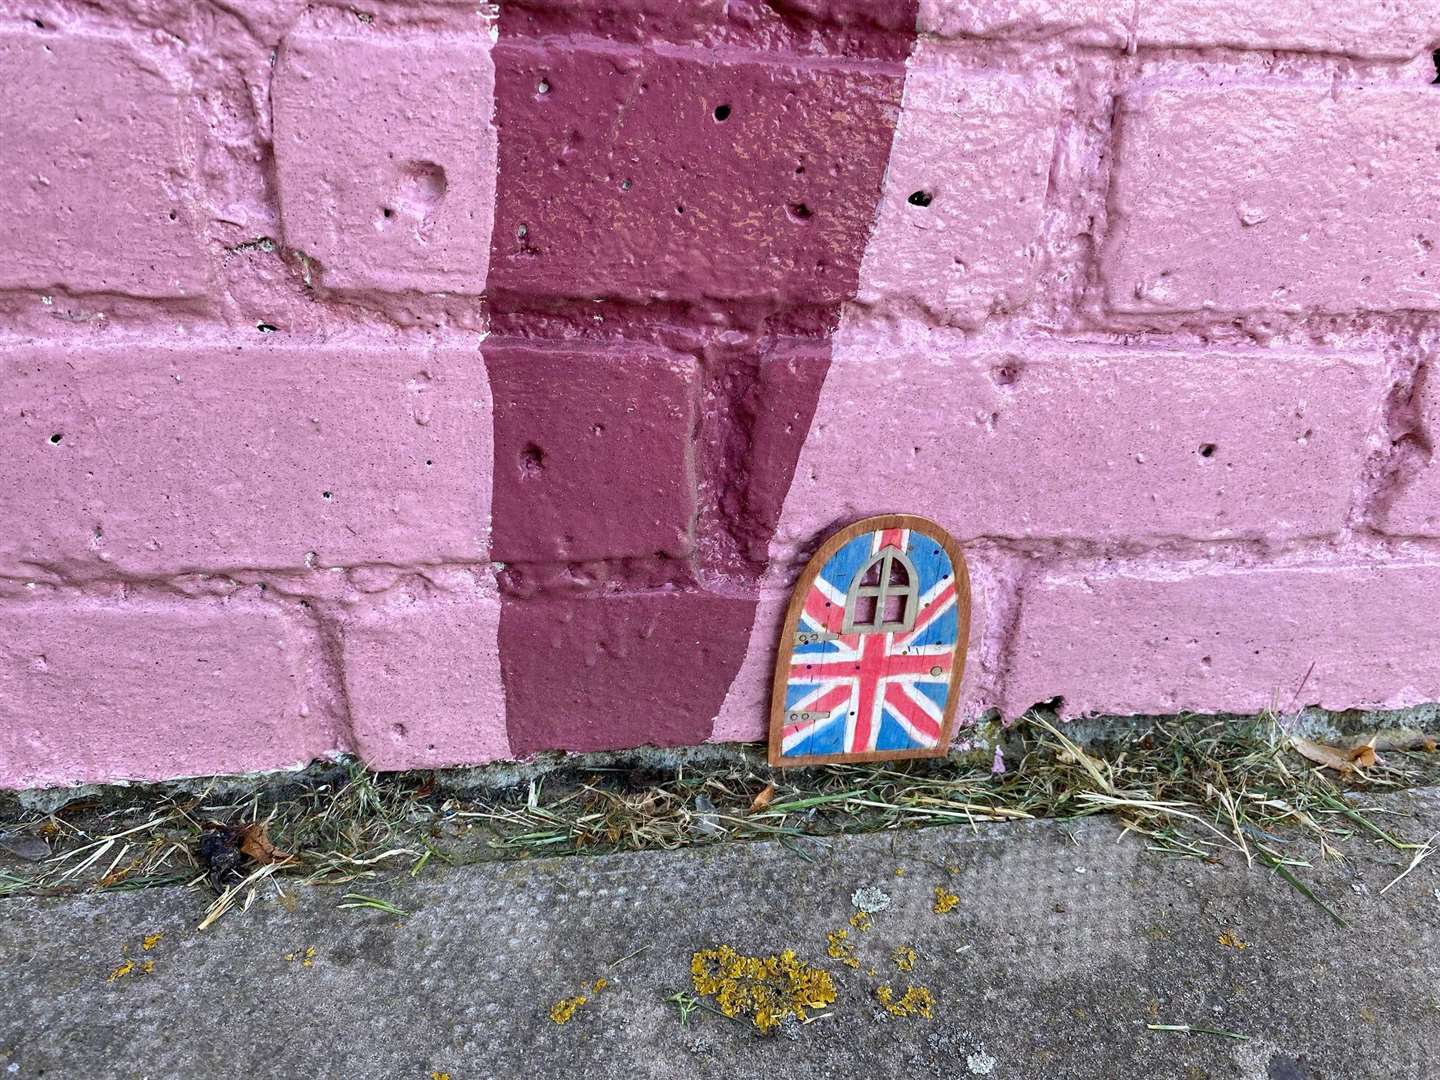 Fairy doors that the community group has put up in an attempt to bring positivity to the park Picture: Stuart Bourne